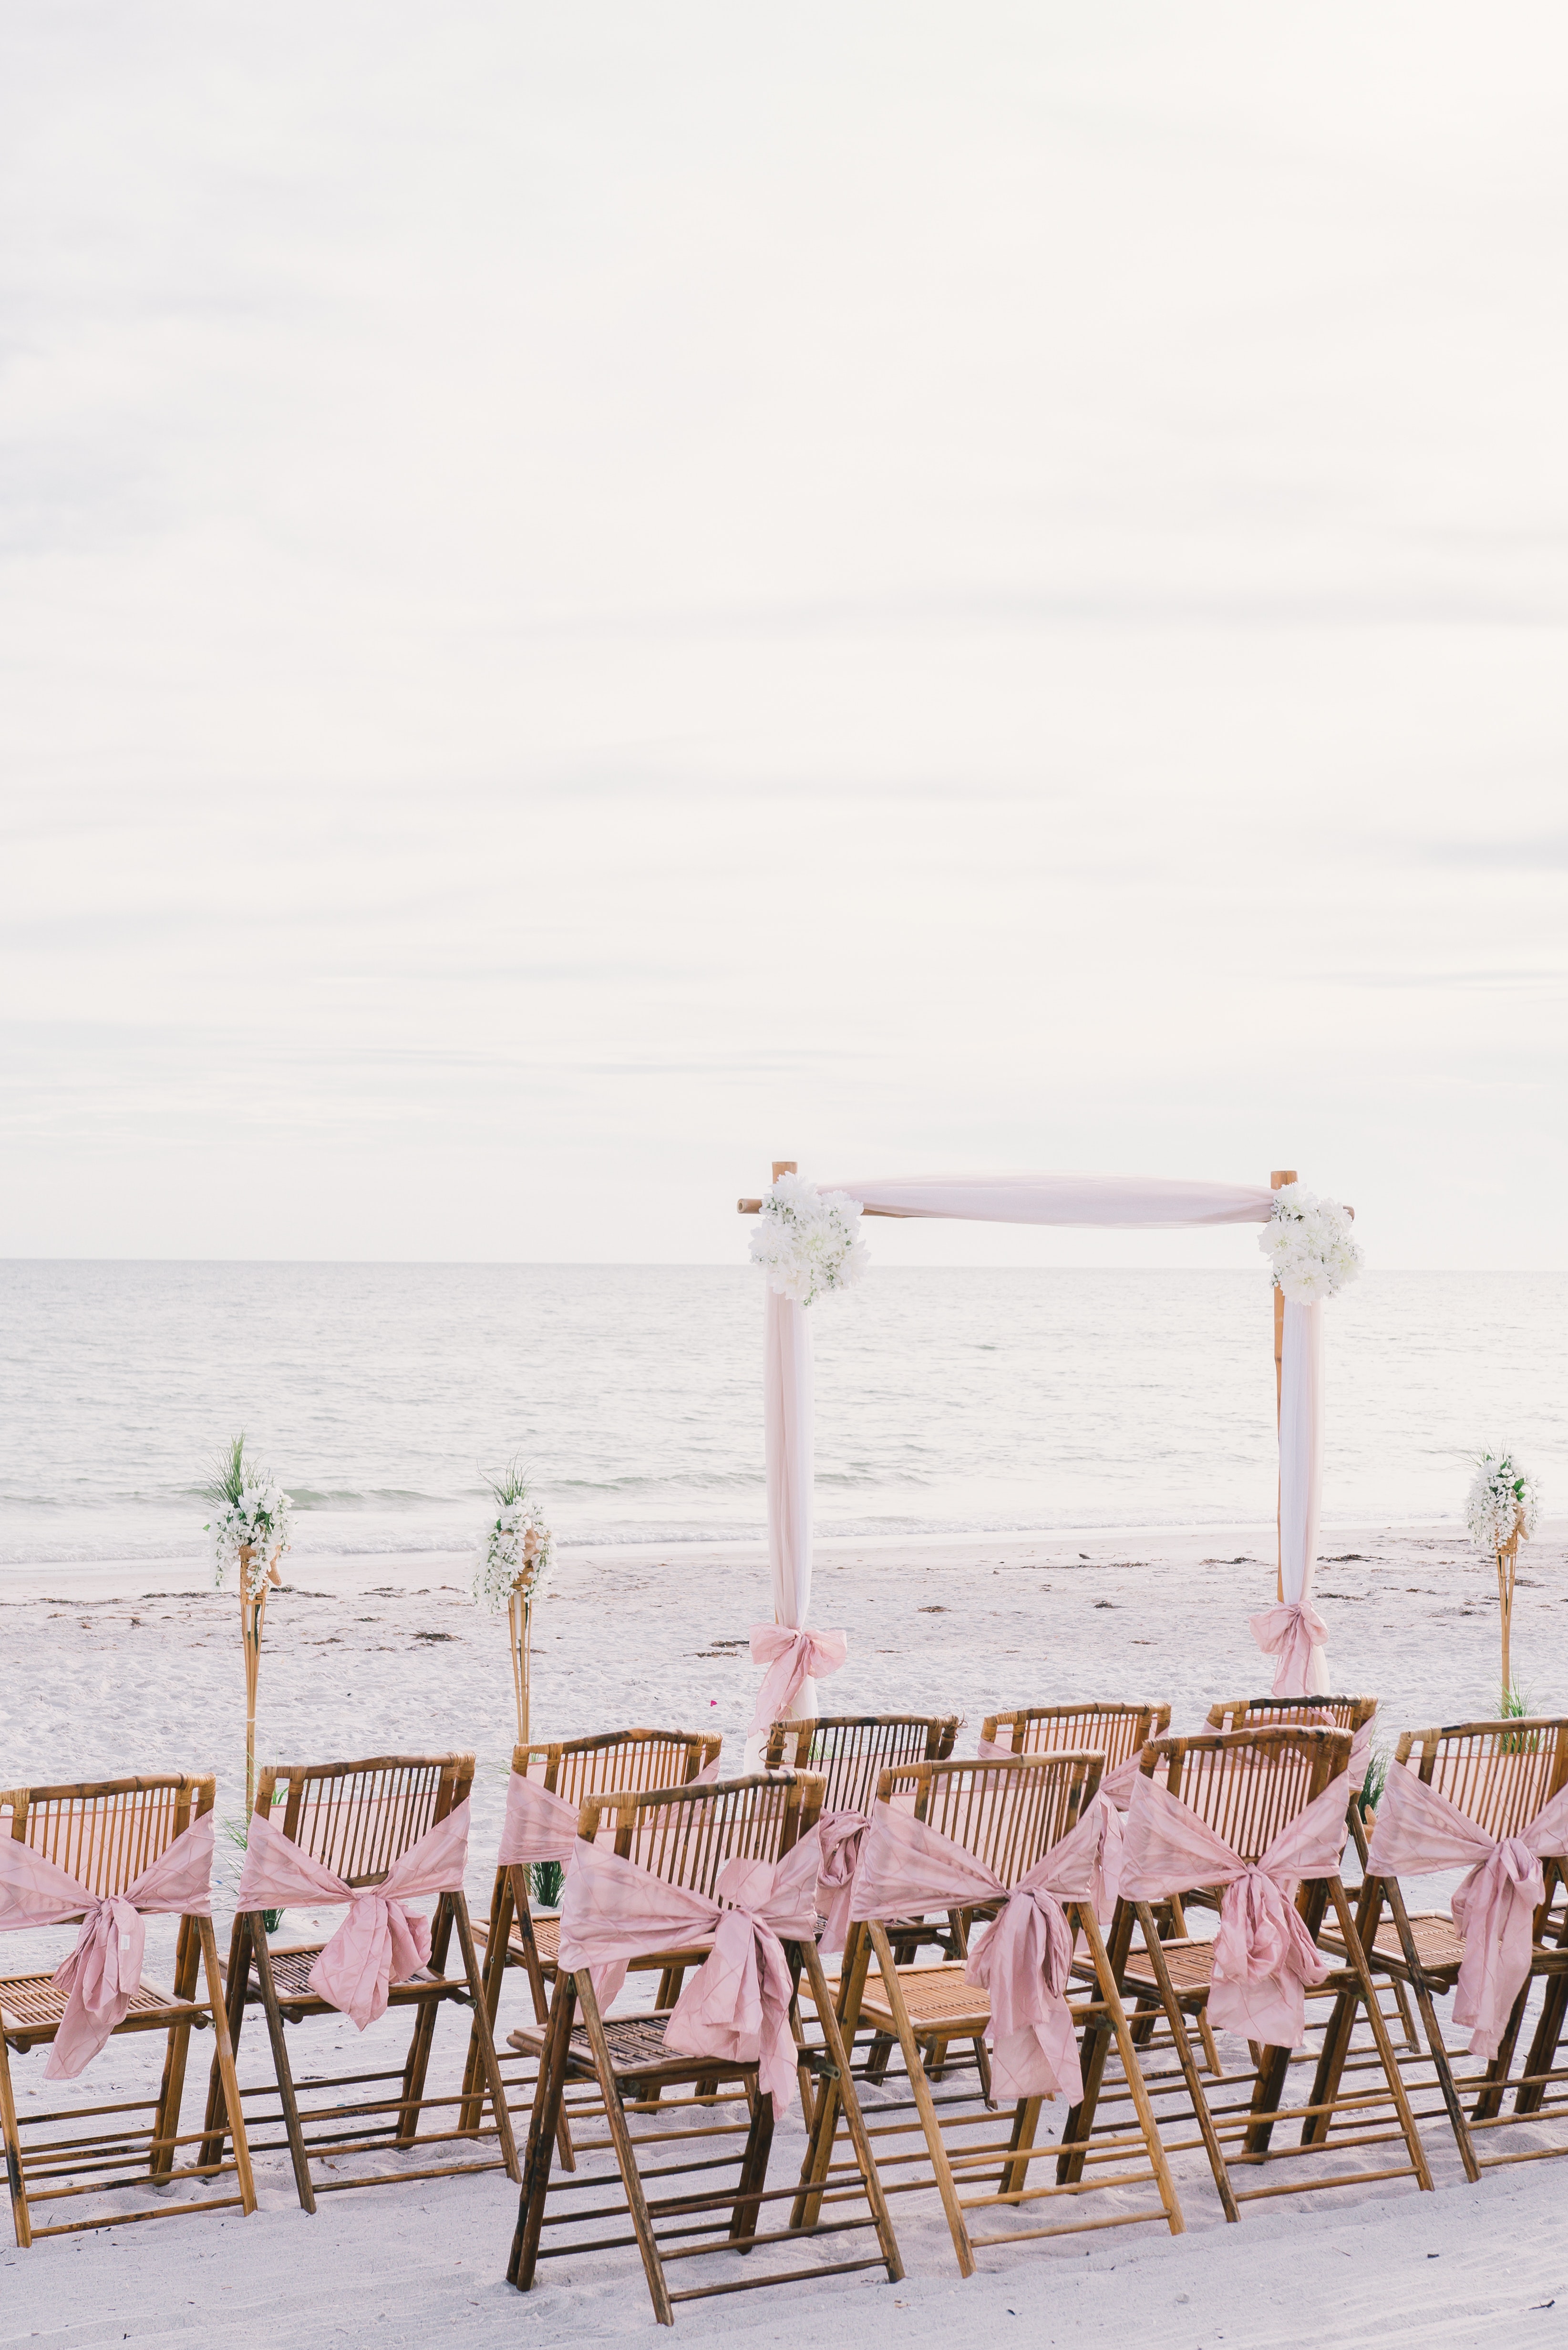 Beautiful weatherproof wedding setup When is the best time to plan a wedding in Mexico and the Caribbean